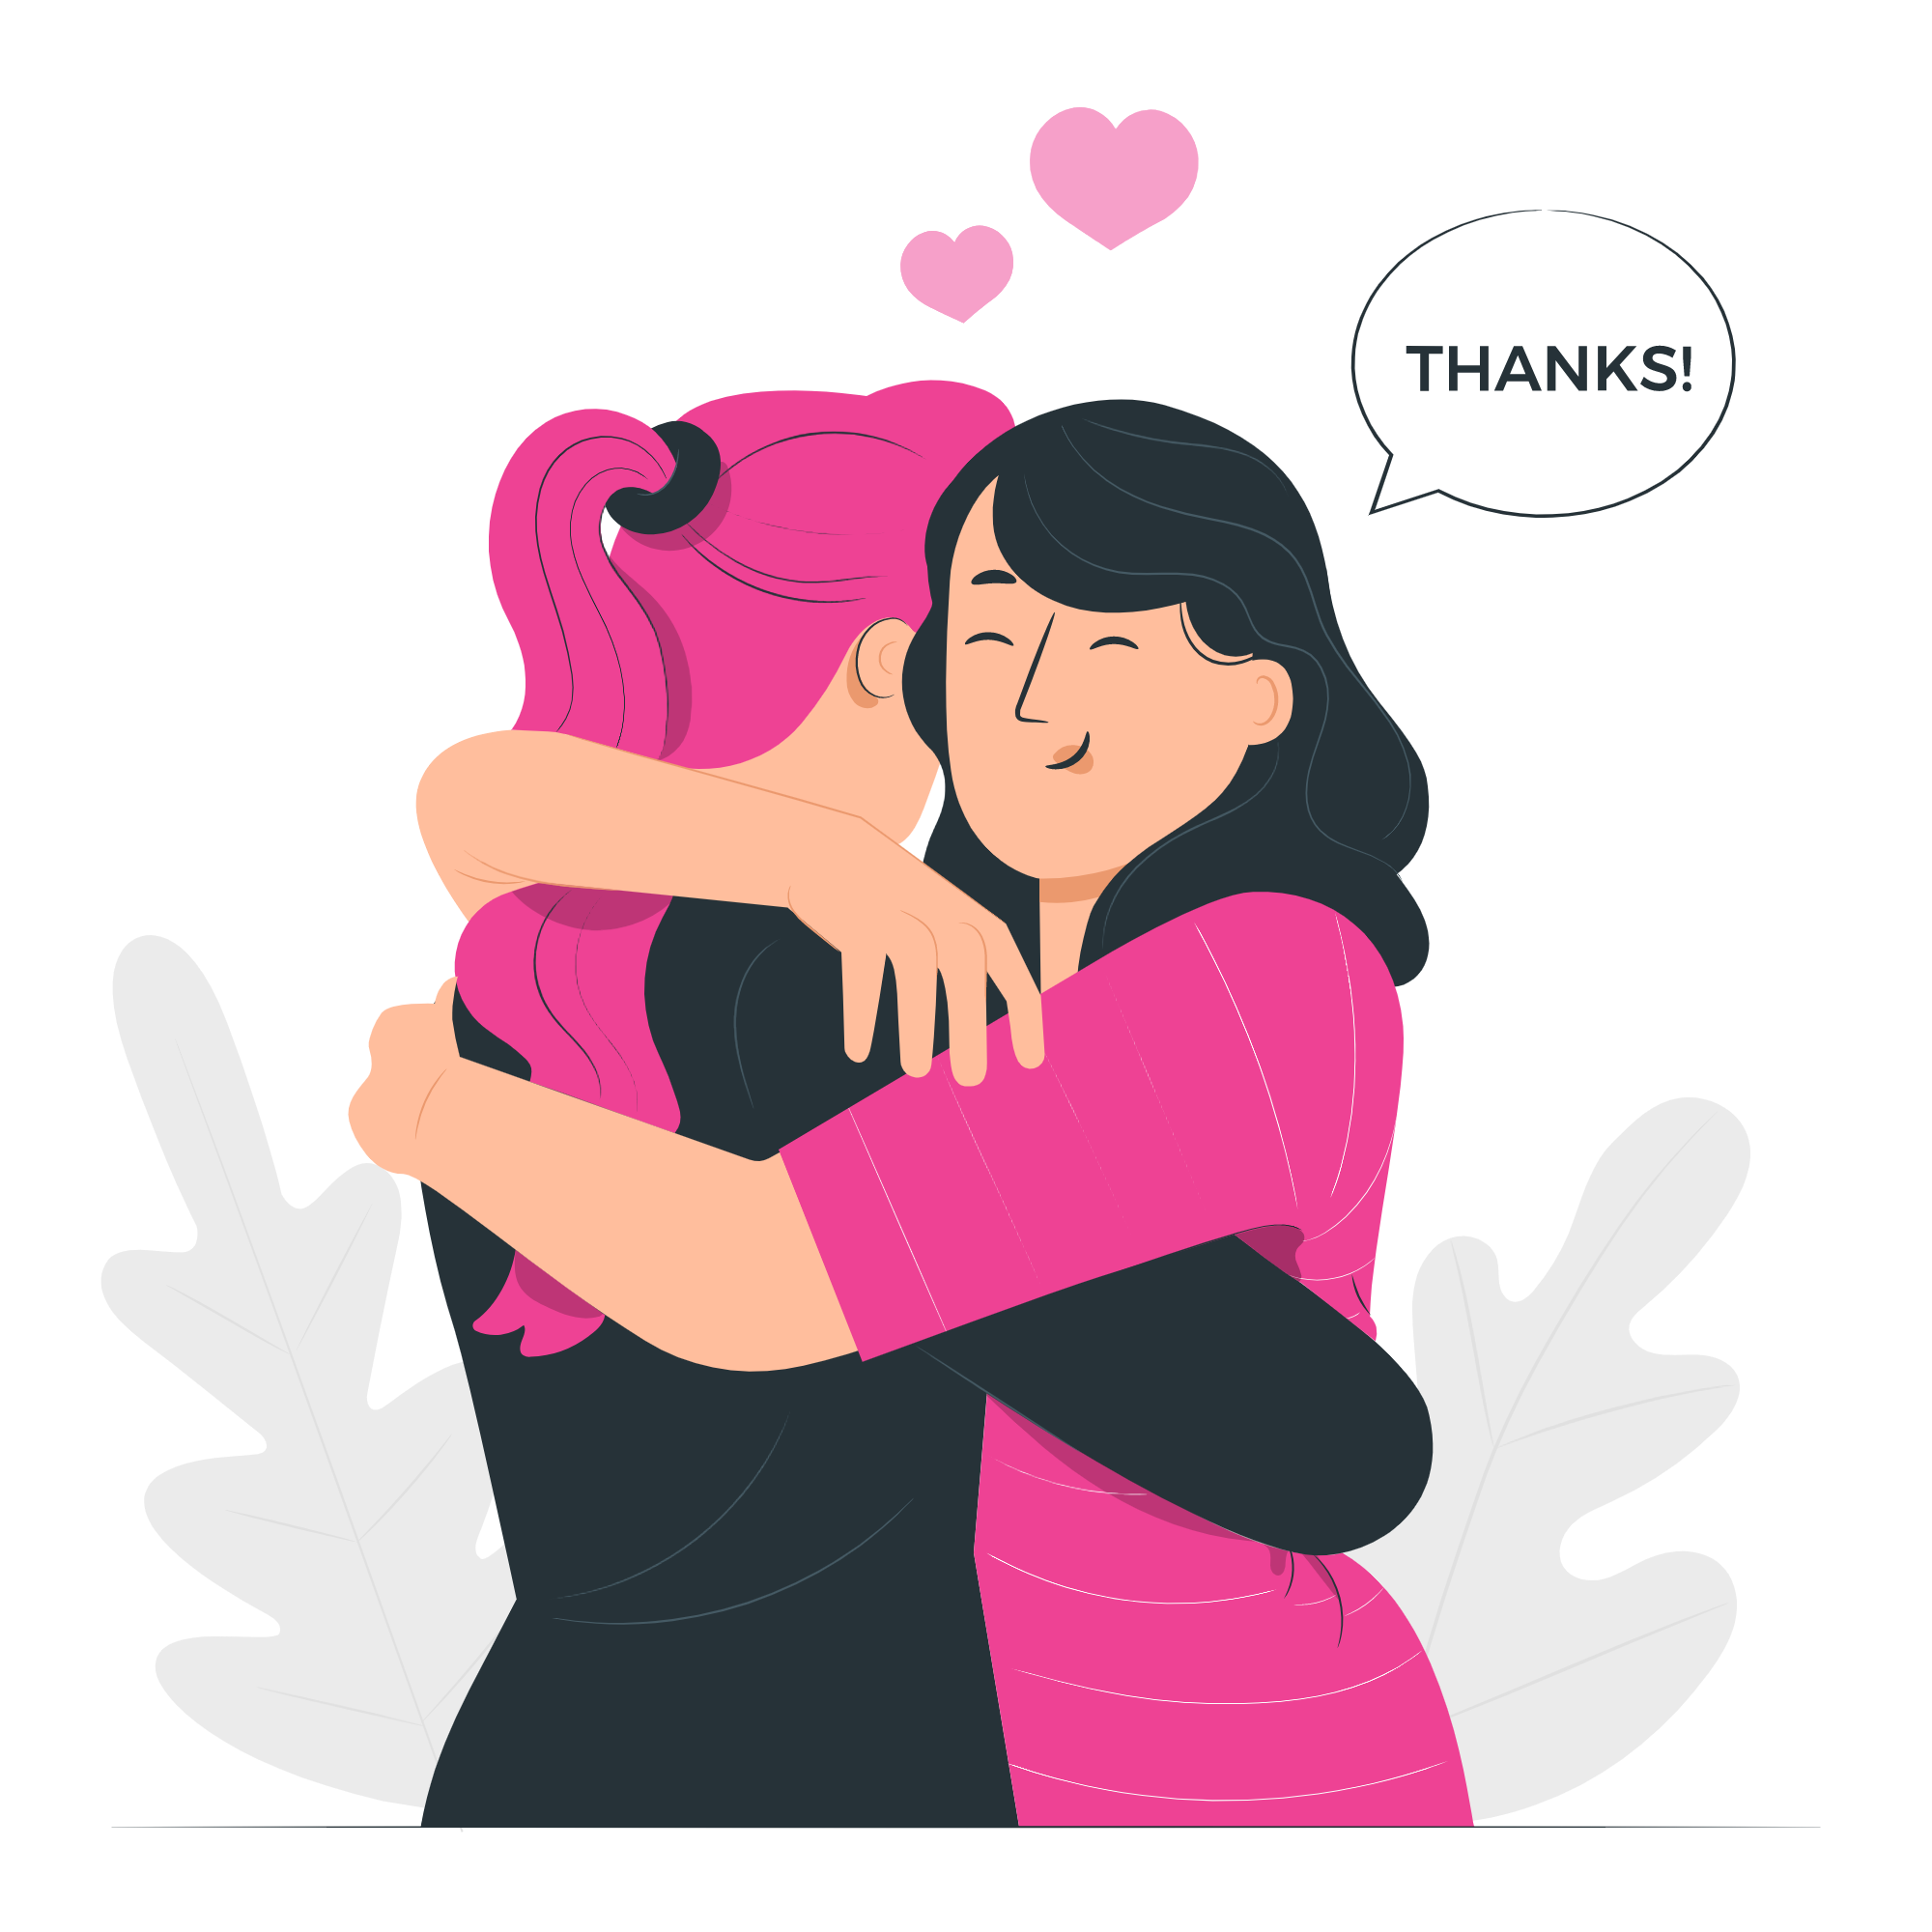 Two people hugging and smiling saying 'thanks'